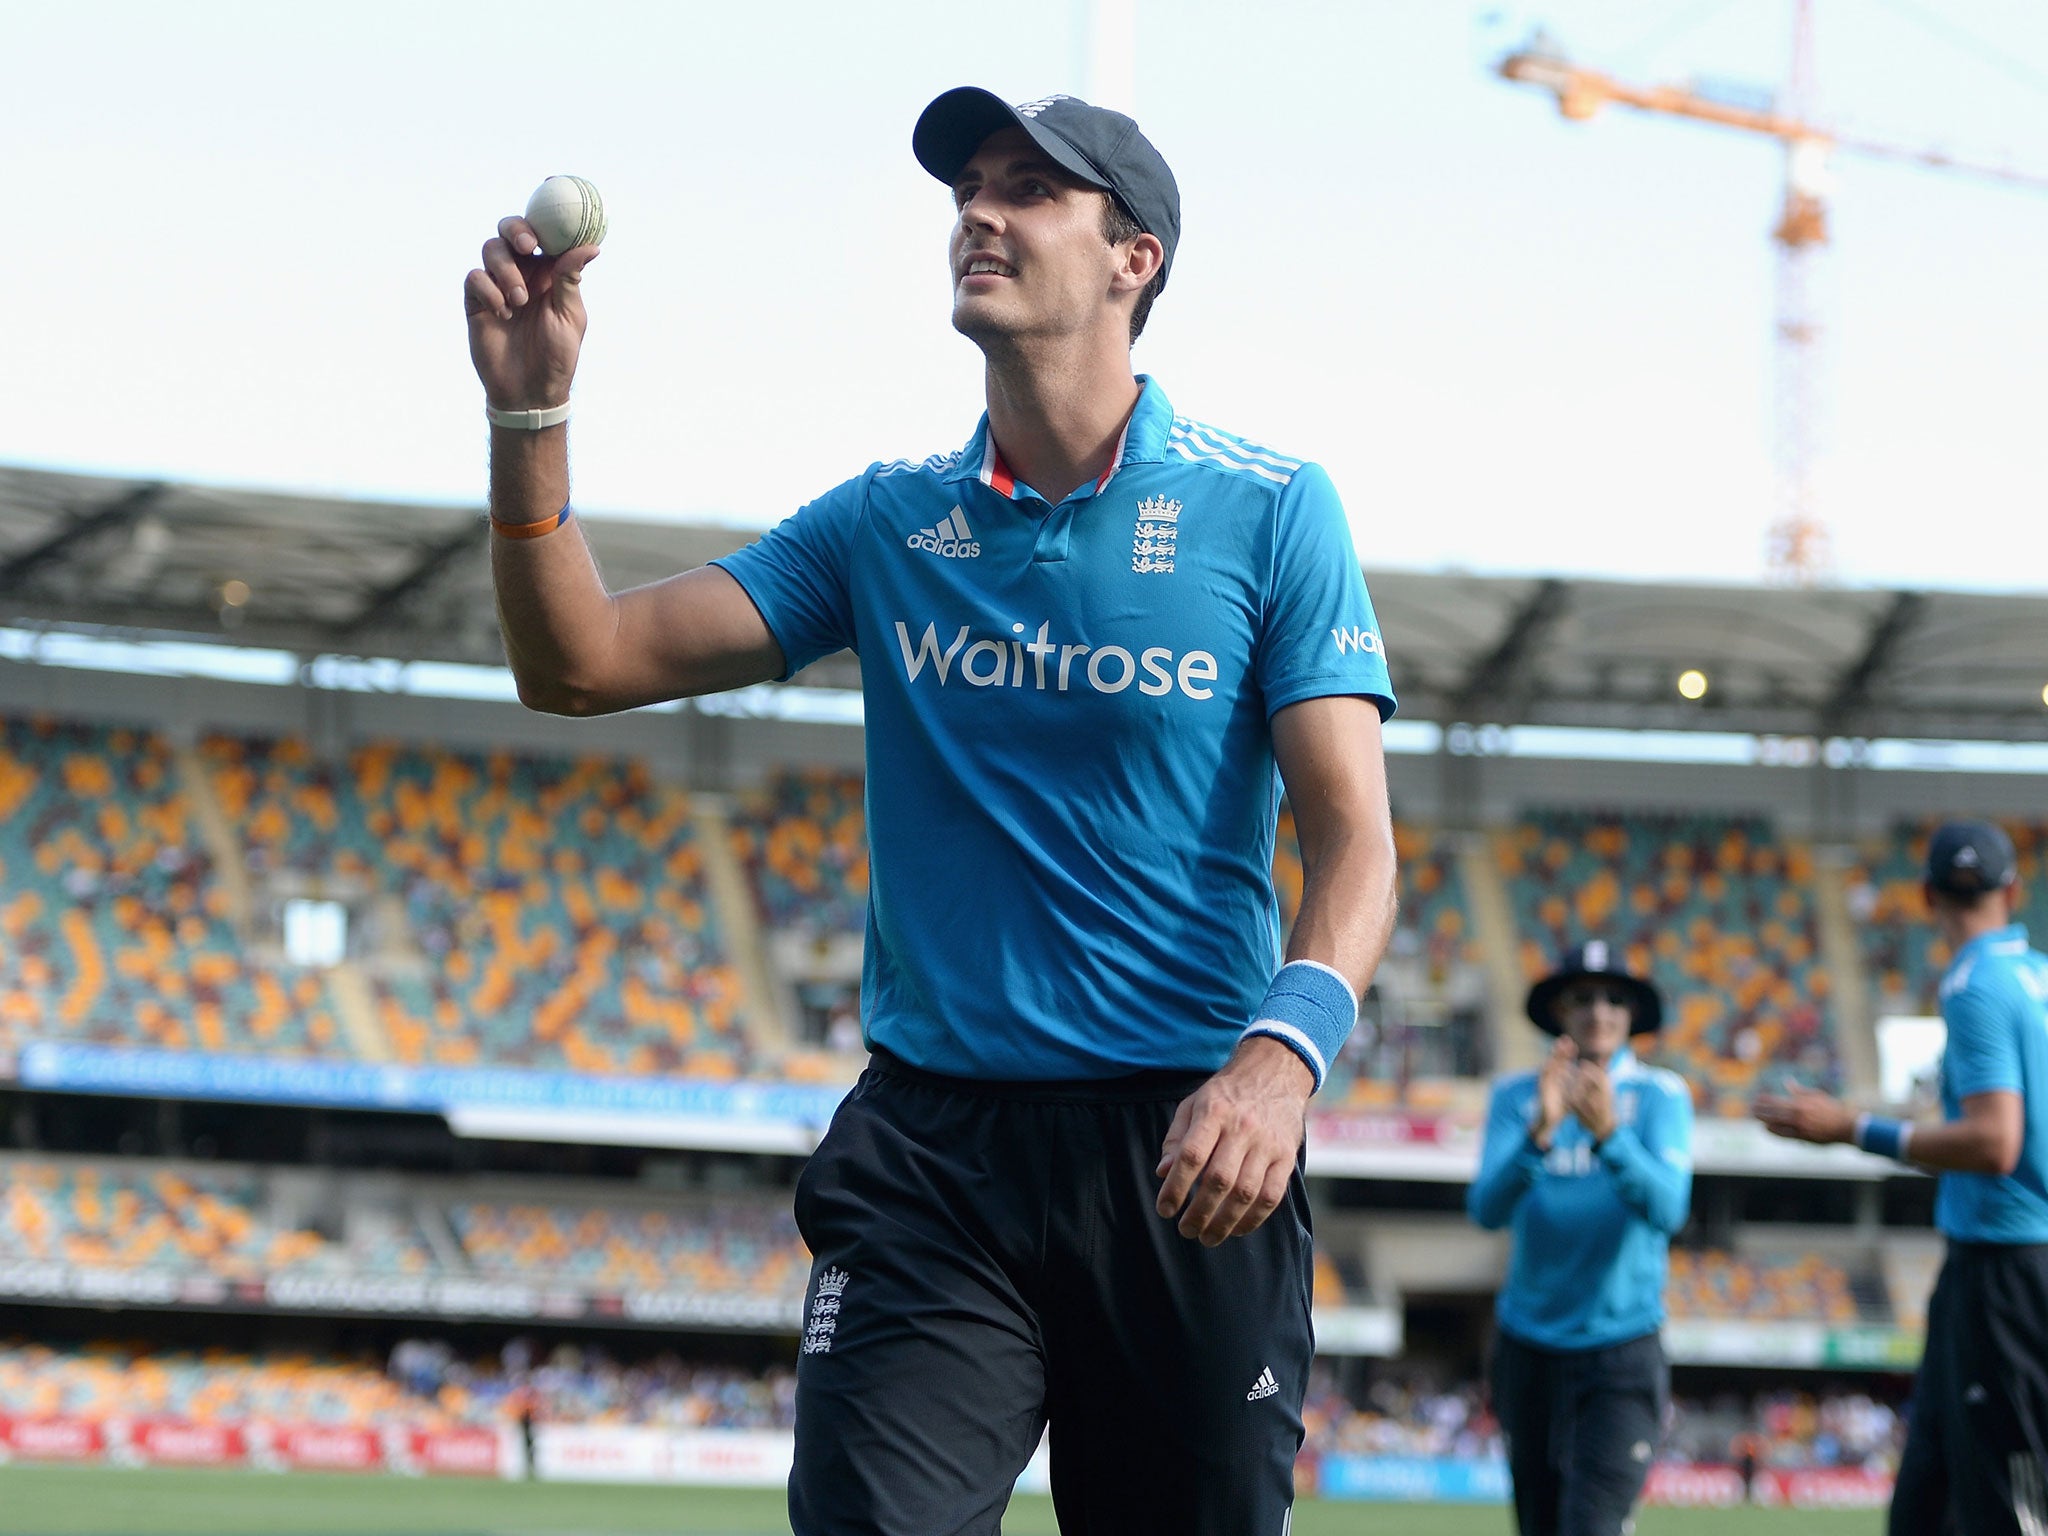 Steven Finn claimed figures of 5-33 to help bowl India out for 153